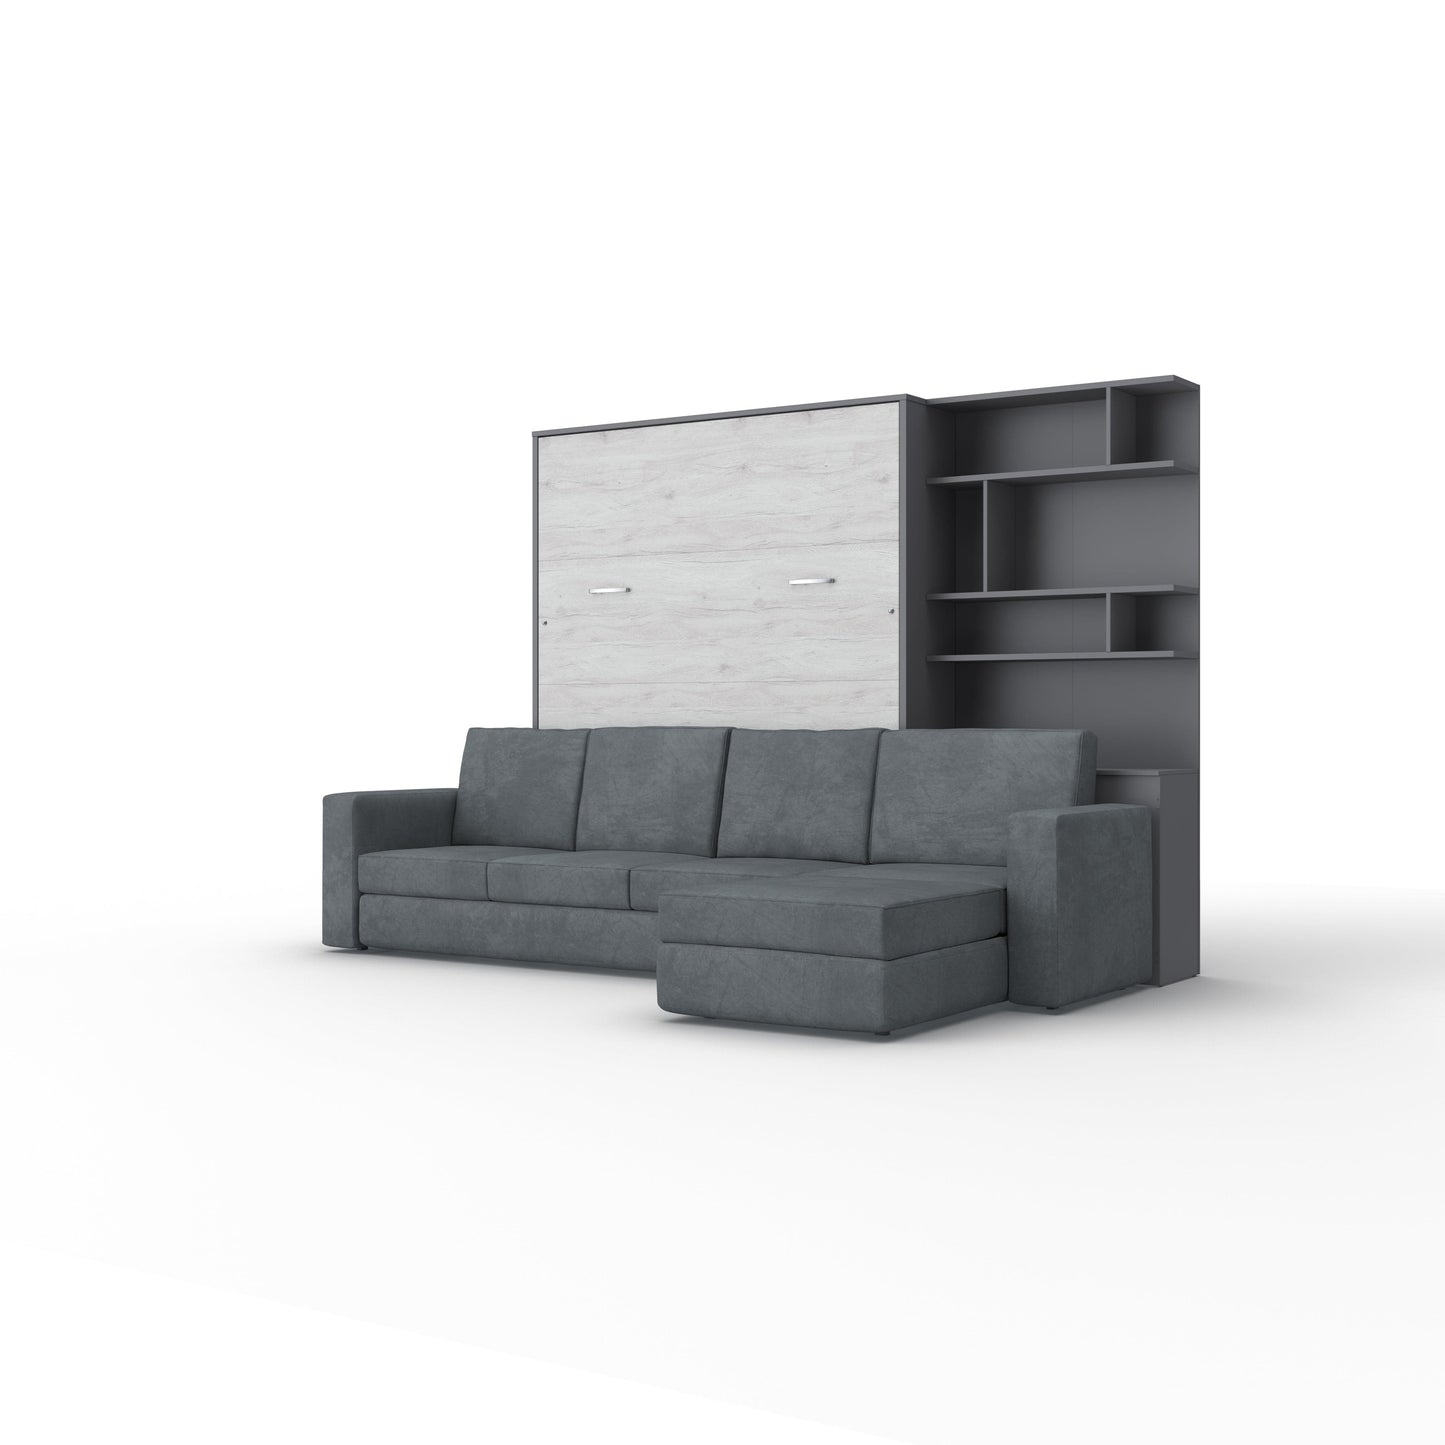 Maxima House Murphy Bed INVENTO European Queen size with a Sectional Sofa and a Bookcase IN014/17GW-LG